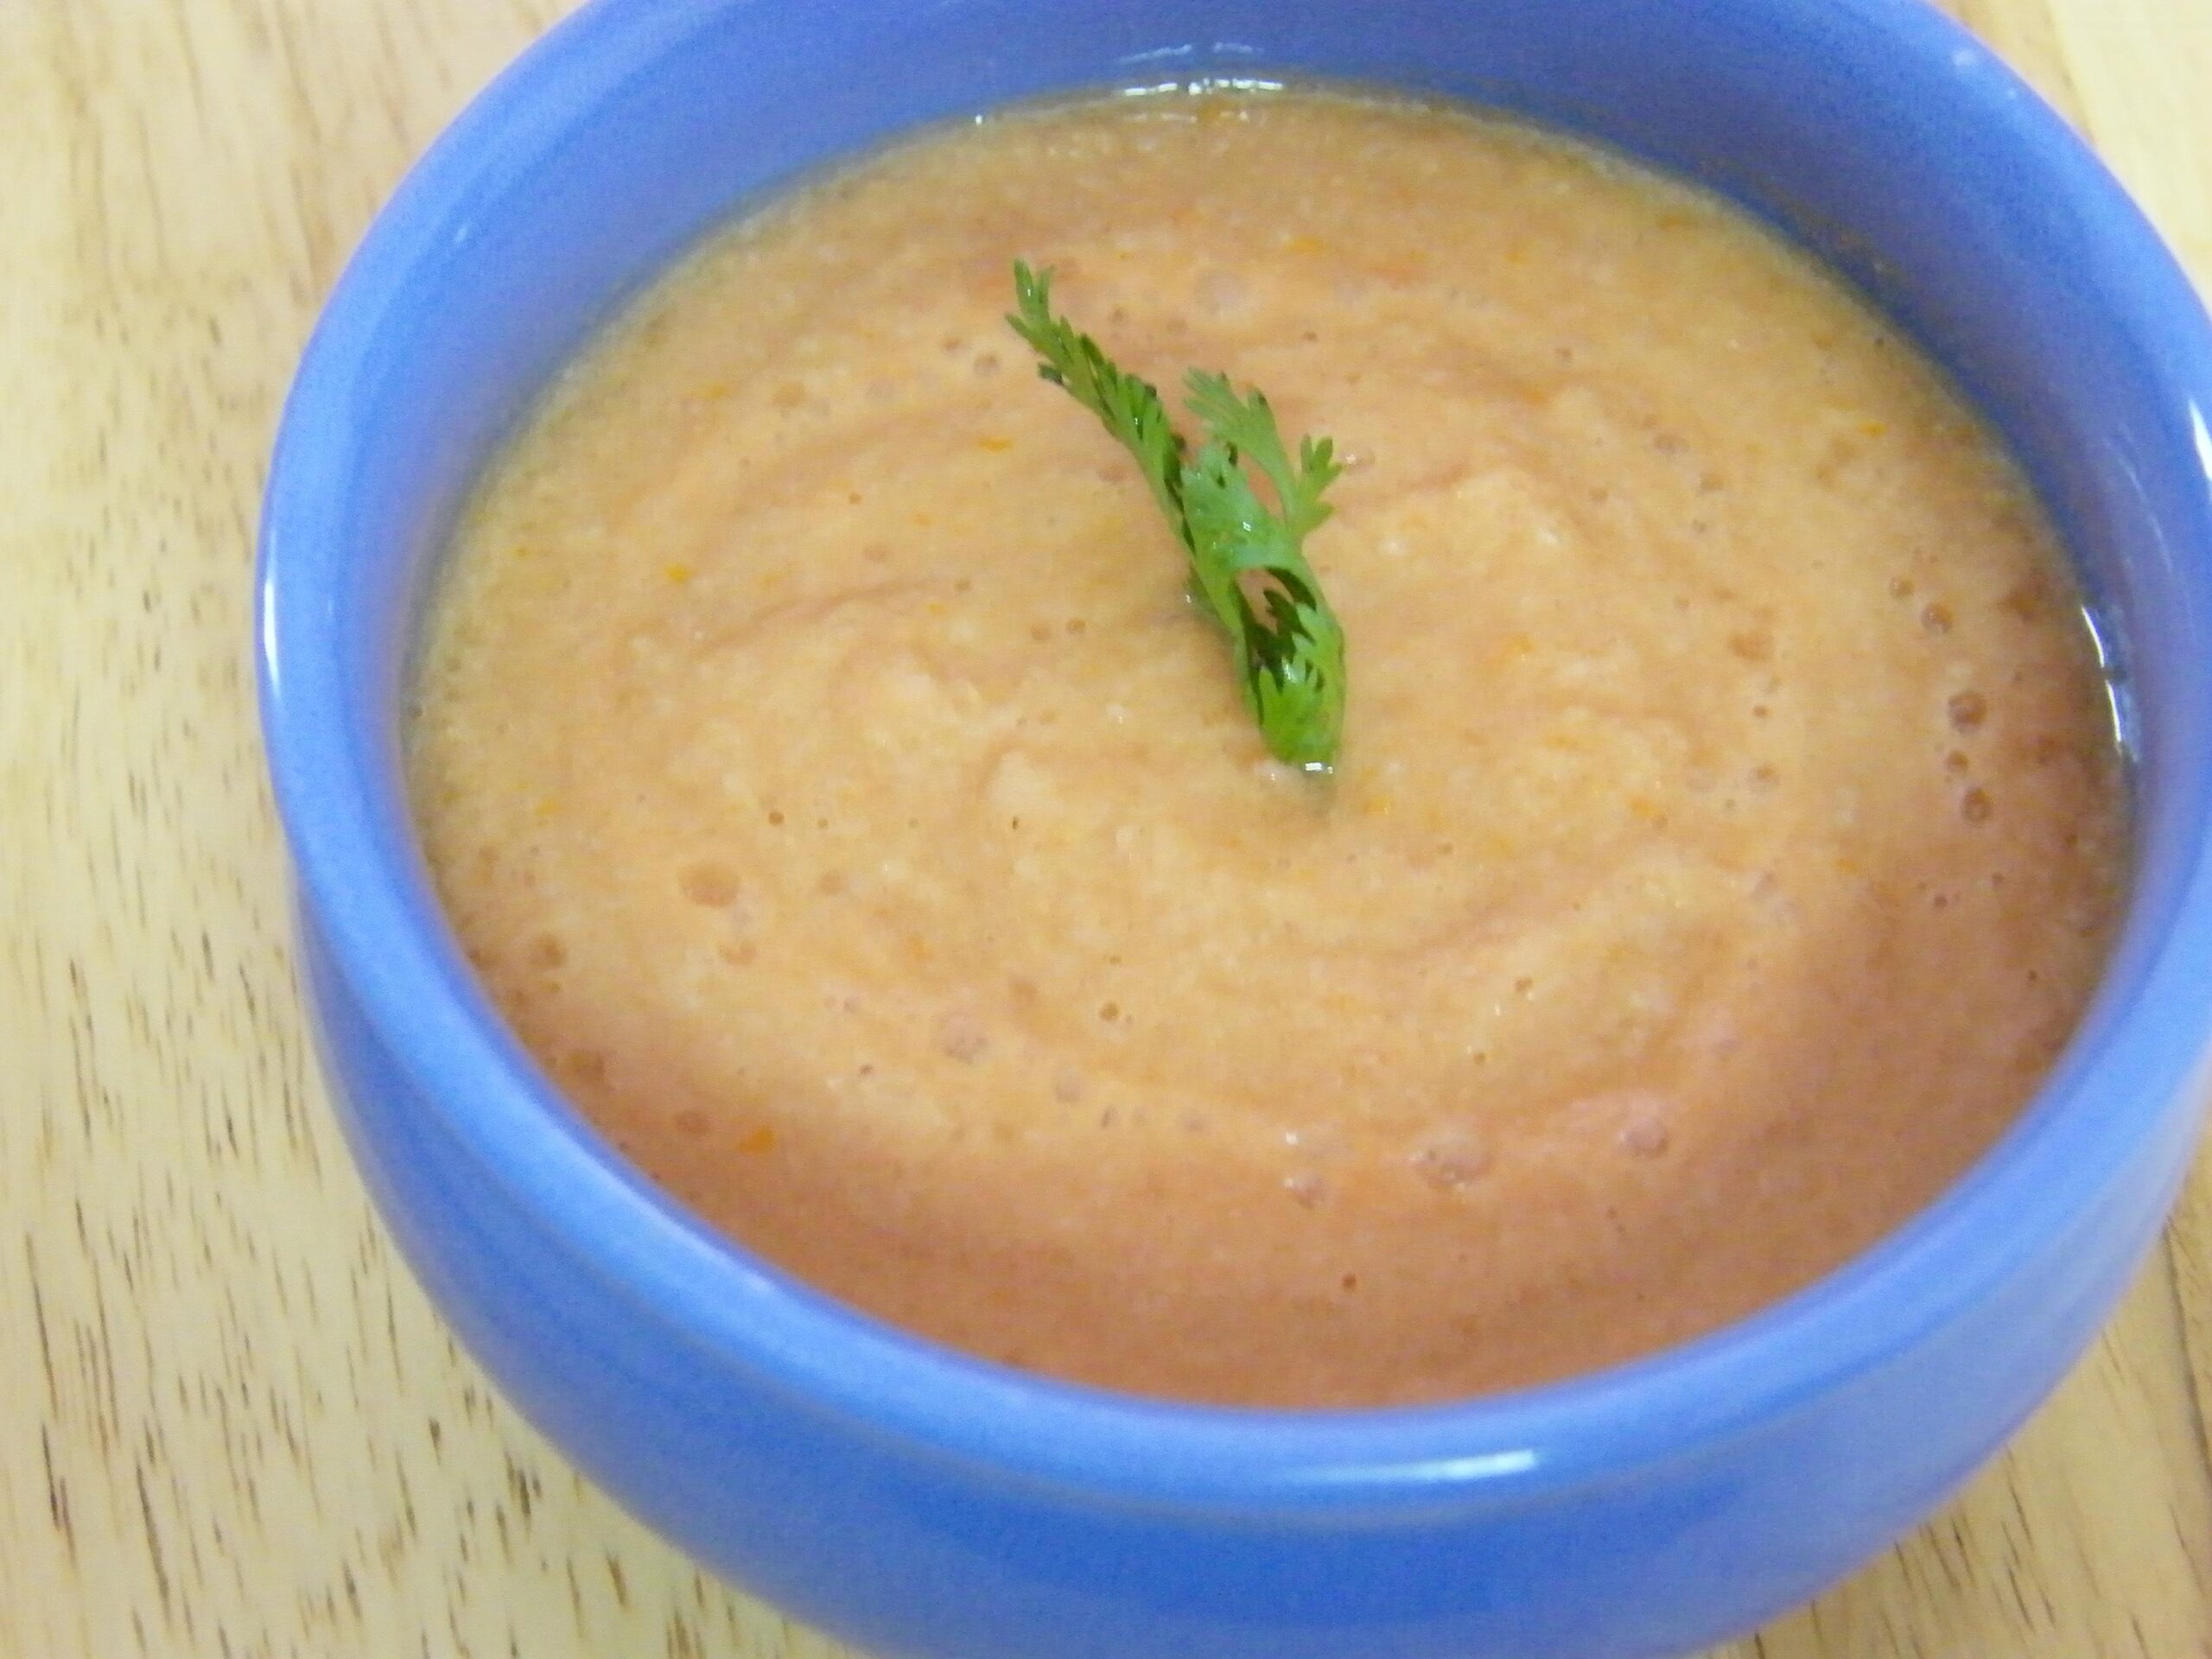 Cool Down with Our Refreshing Gazpacho Recipe